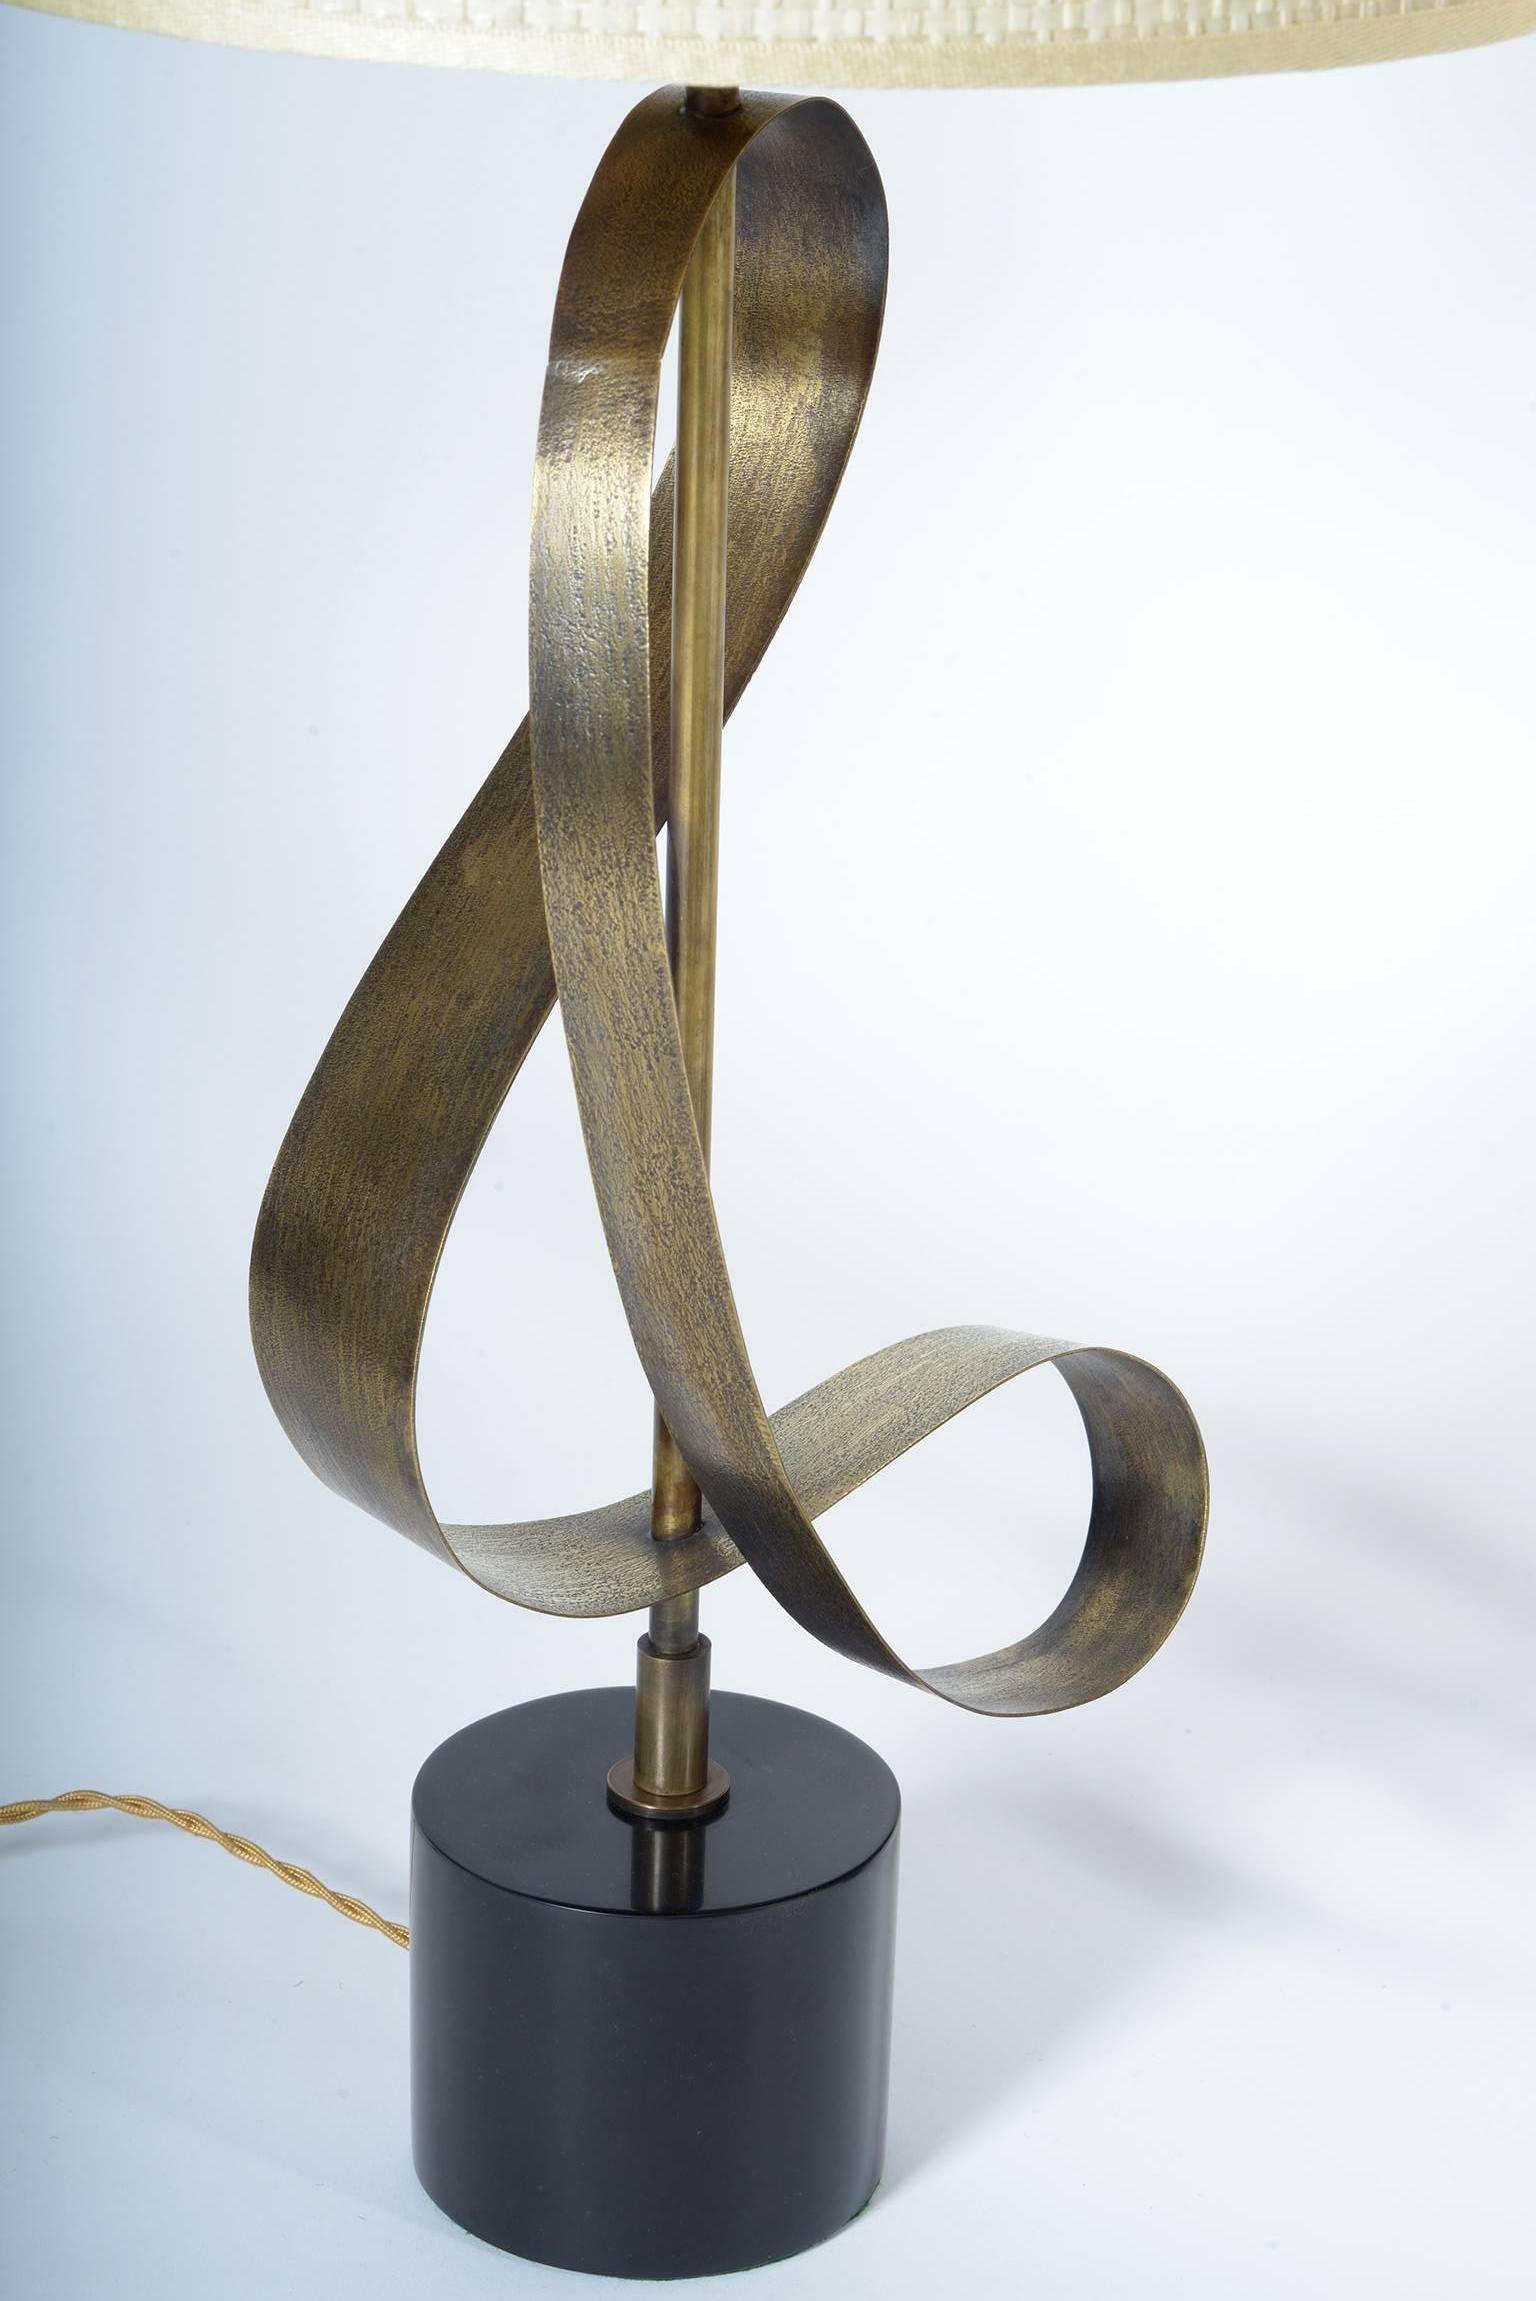 Solid black Belgian marble base and strips in the form of sinuous knurled brass flake.
The brass surface is engraved, knurled, to create a vibrating effect with the light on.
The lamps are shaped like a right and left as a real pair.
The